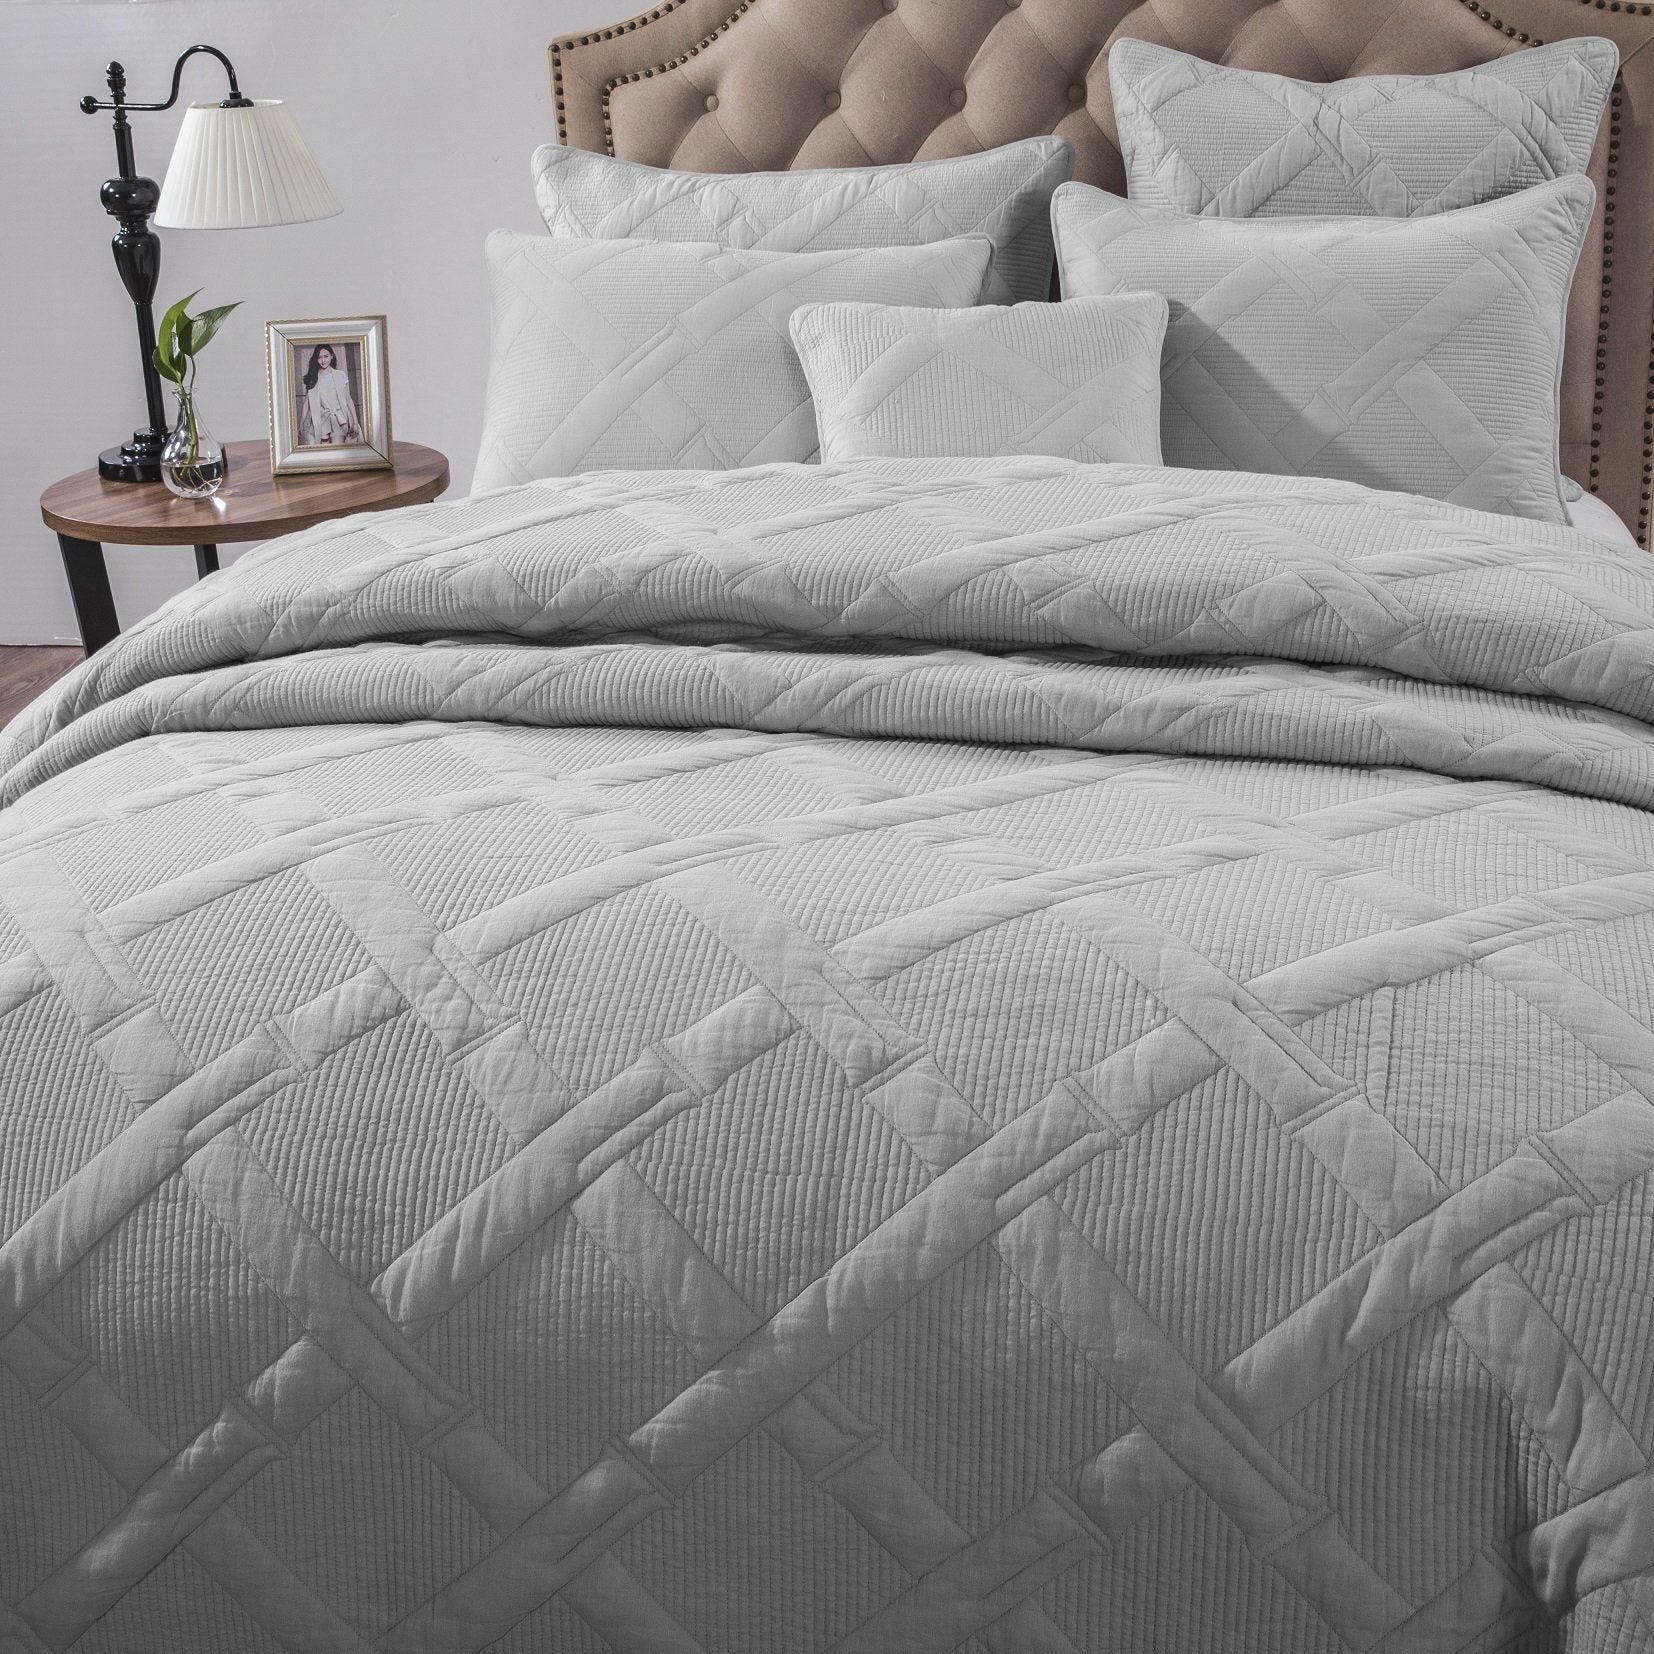 Tache Cotton Soothing Pastel Light Grey Silver Diamond Bedspread (JHW-862) - Tache Home Fashion